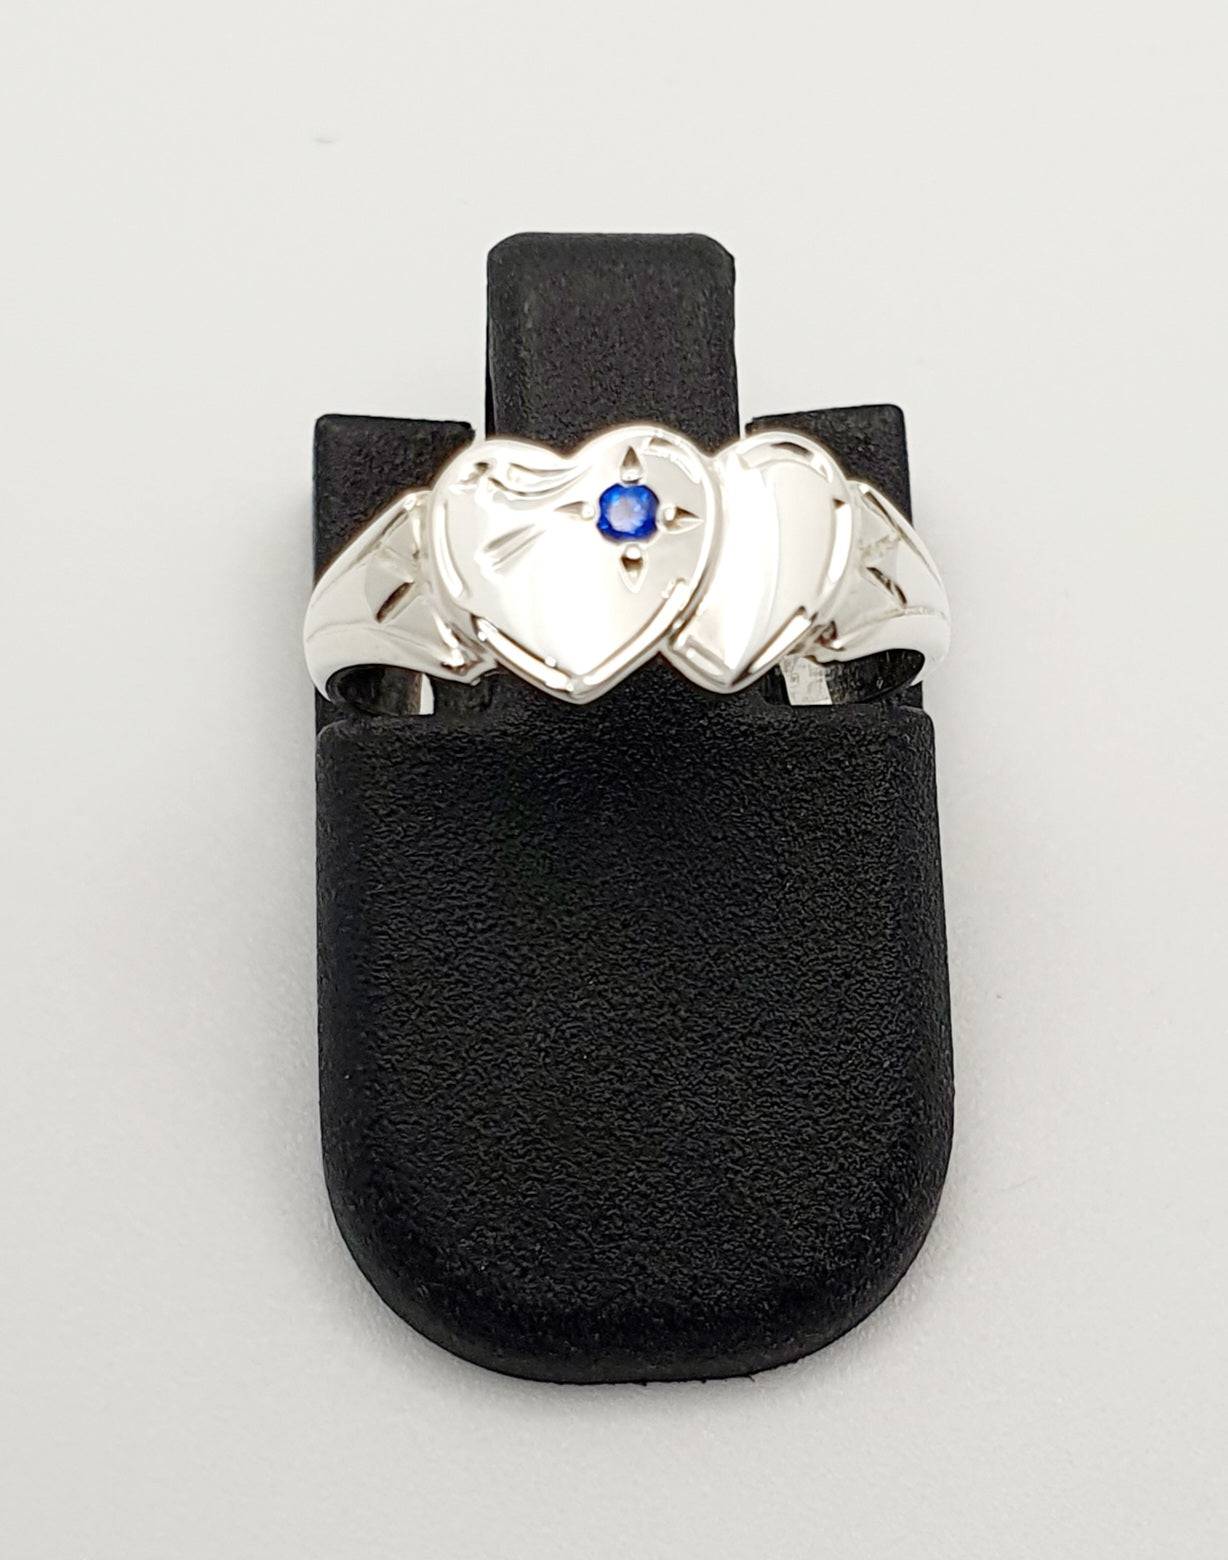 S/S Double Heart Signet Ring With Blue Stone. Size E